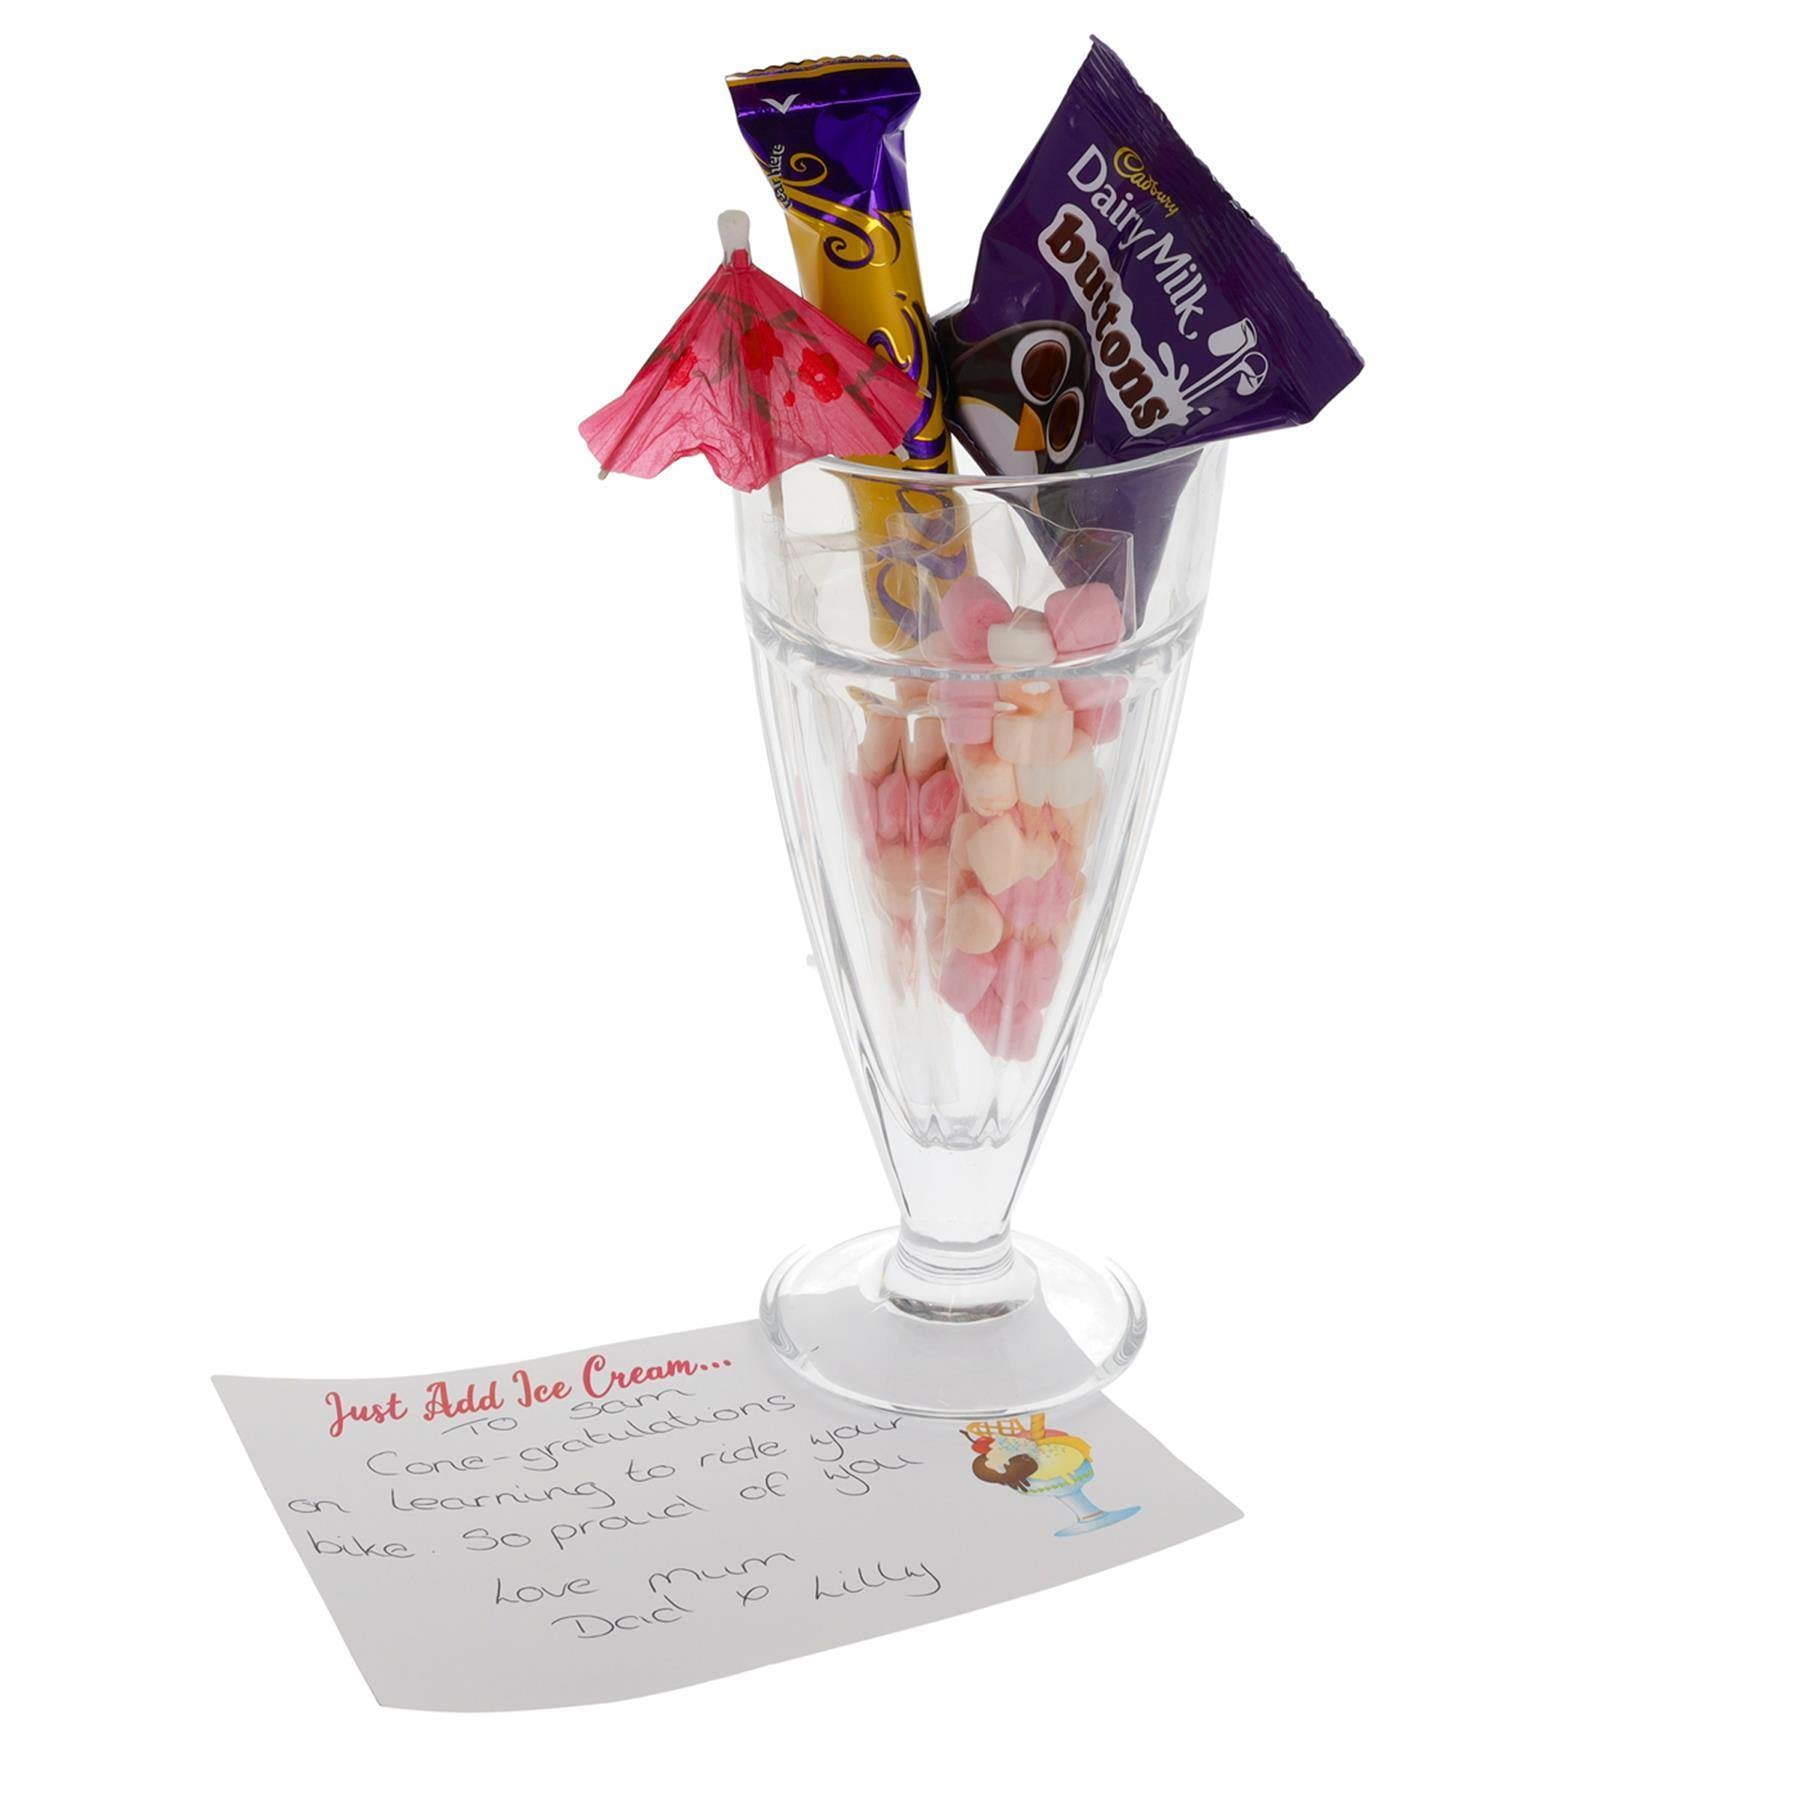 Engraved Personalised Ice Cream Sundae Glass Filled with Goodies Gift  - Always Looking Good - Filled Sundae Set  